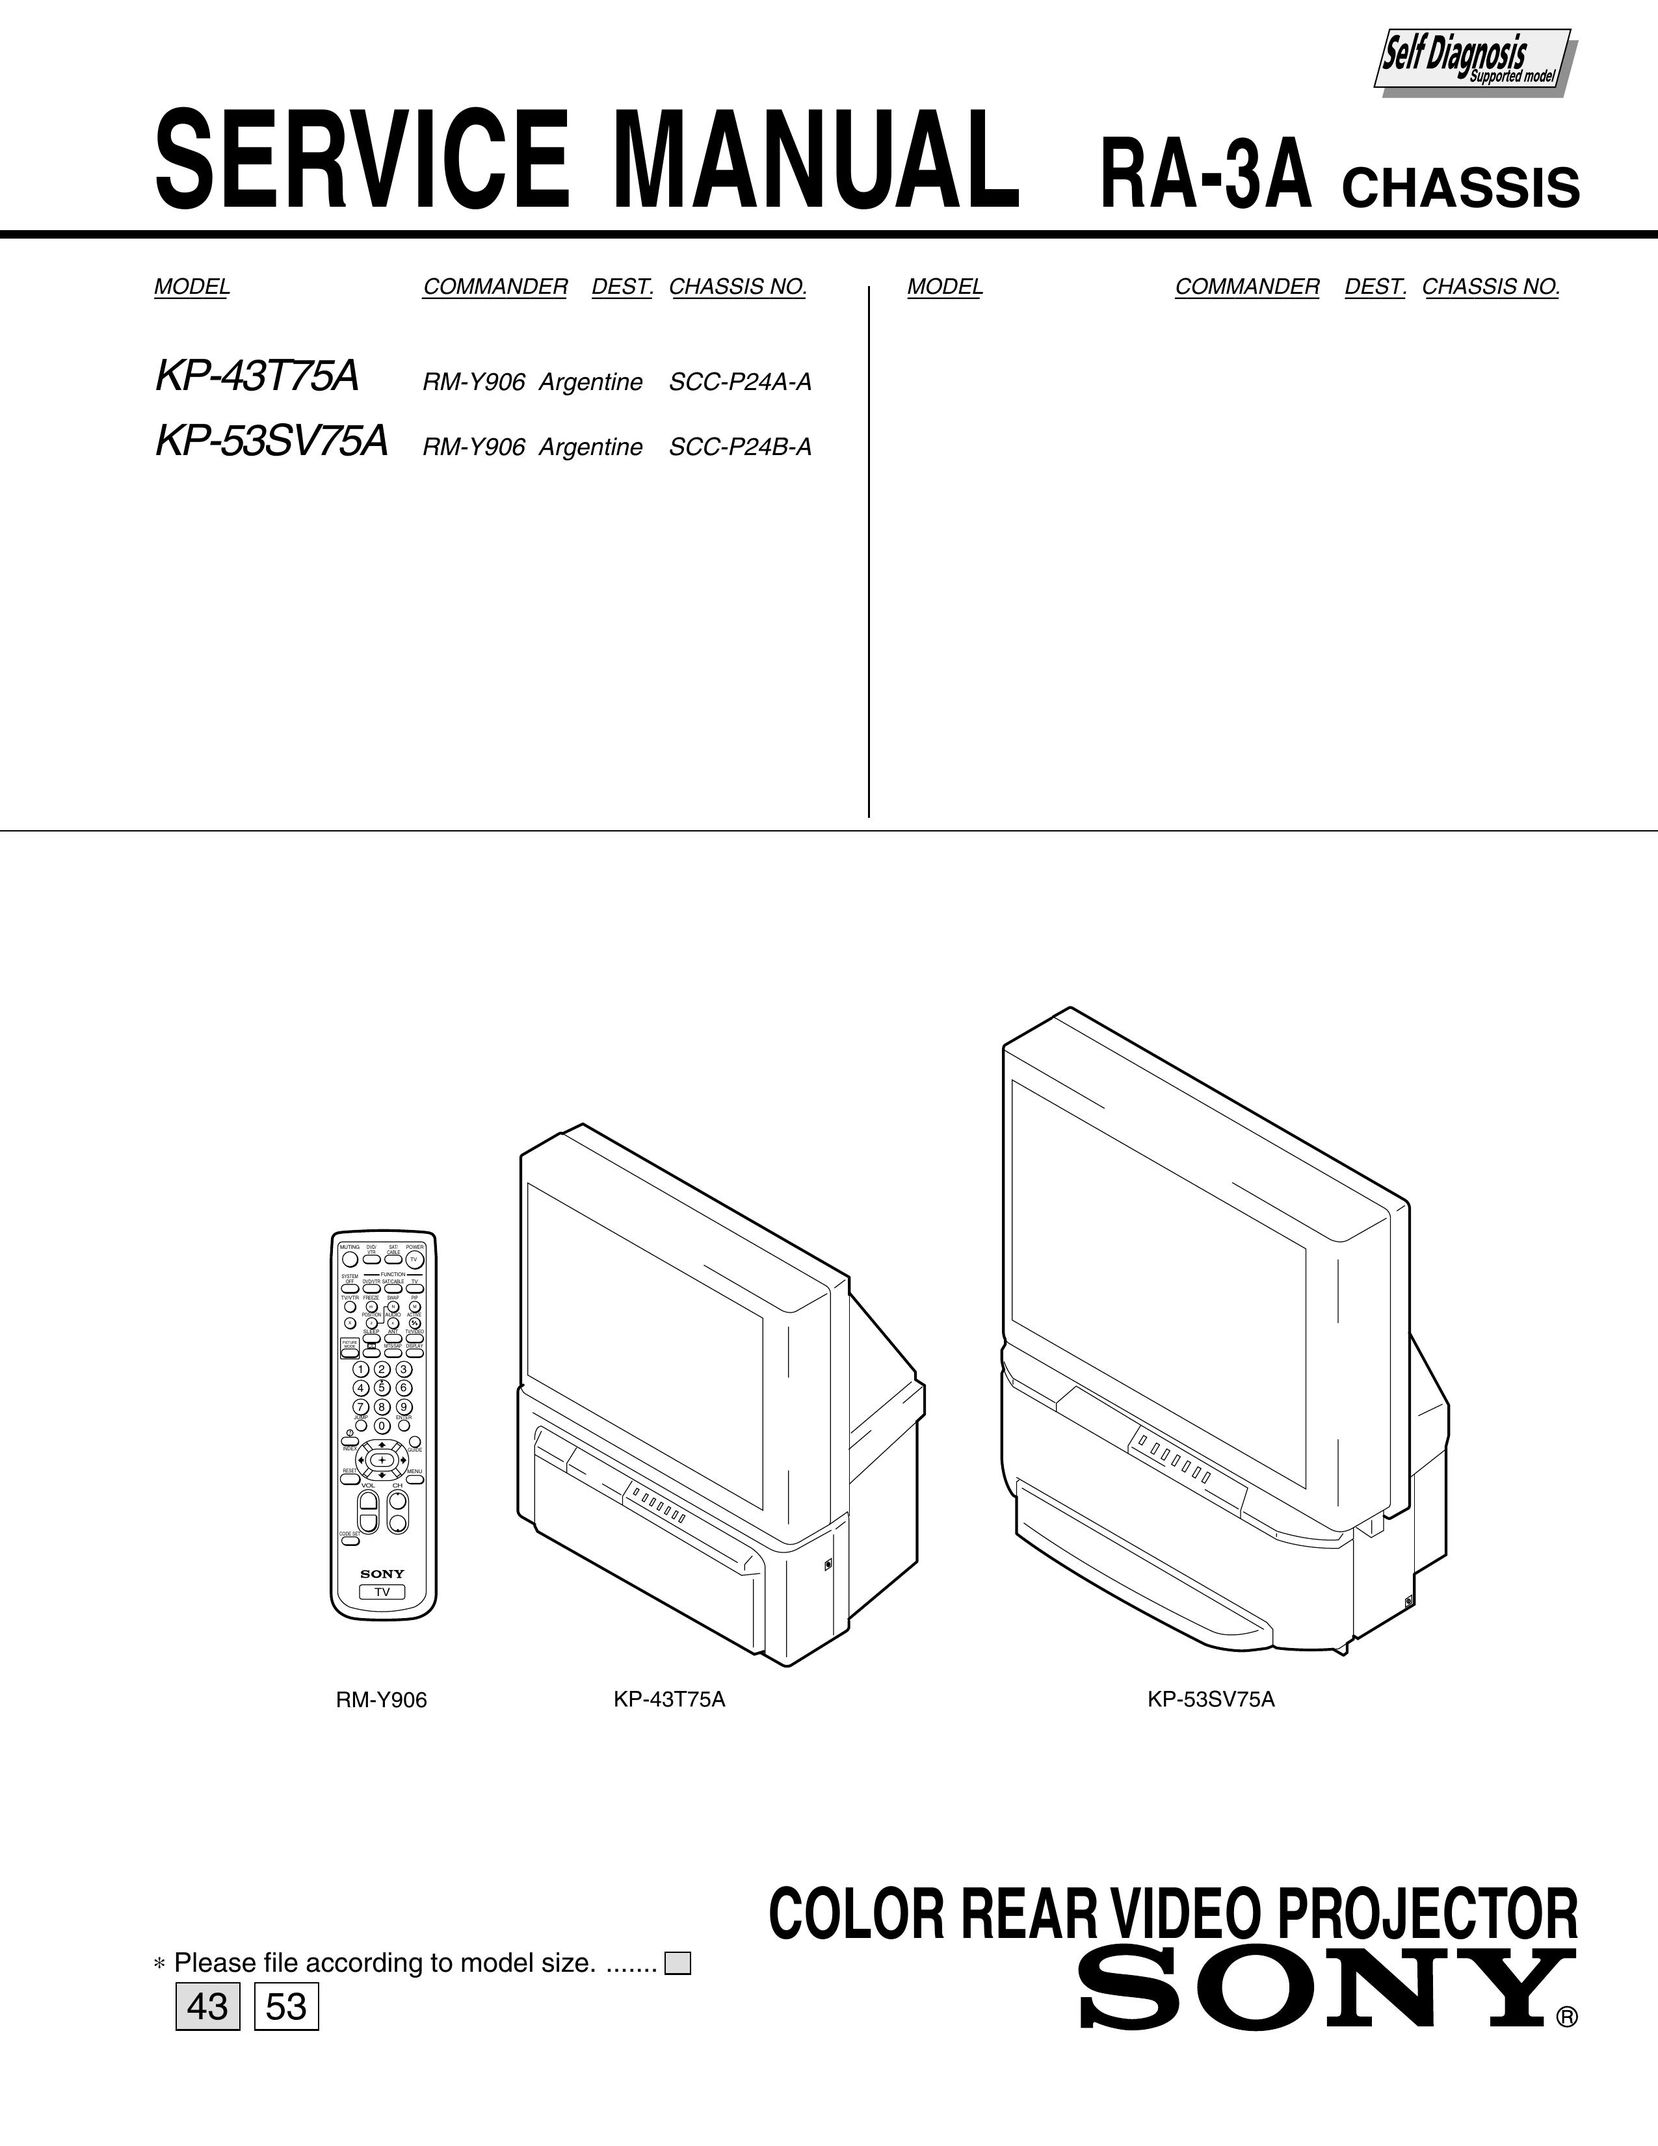 Sony KP-53SV75A Projector User Manual